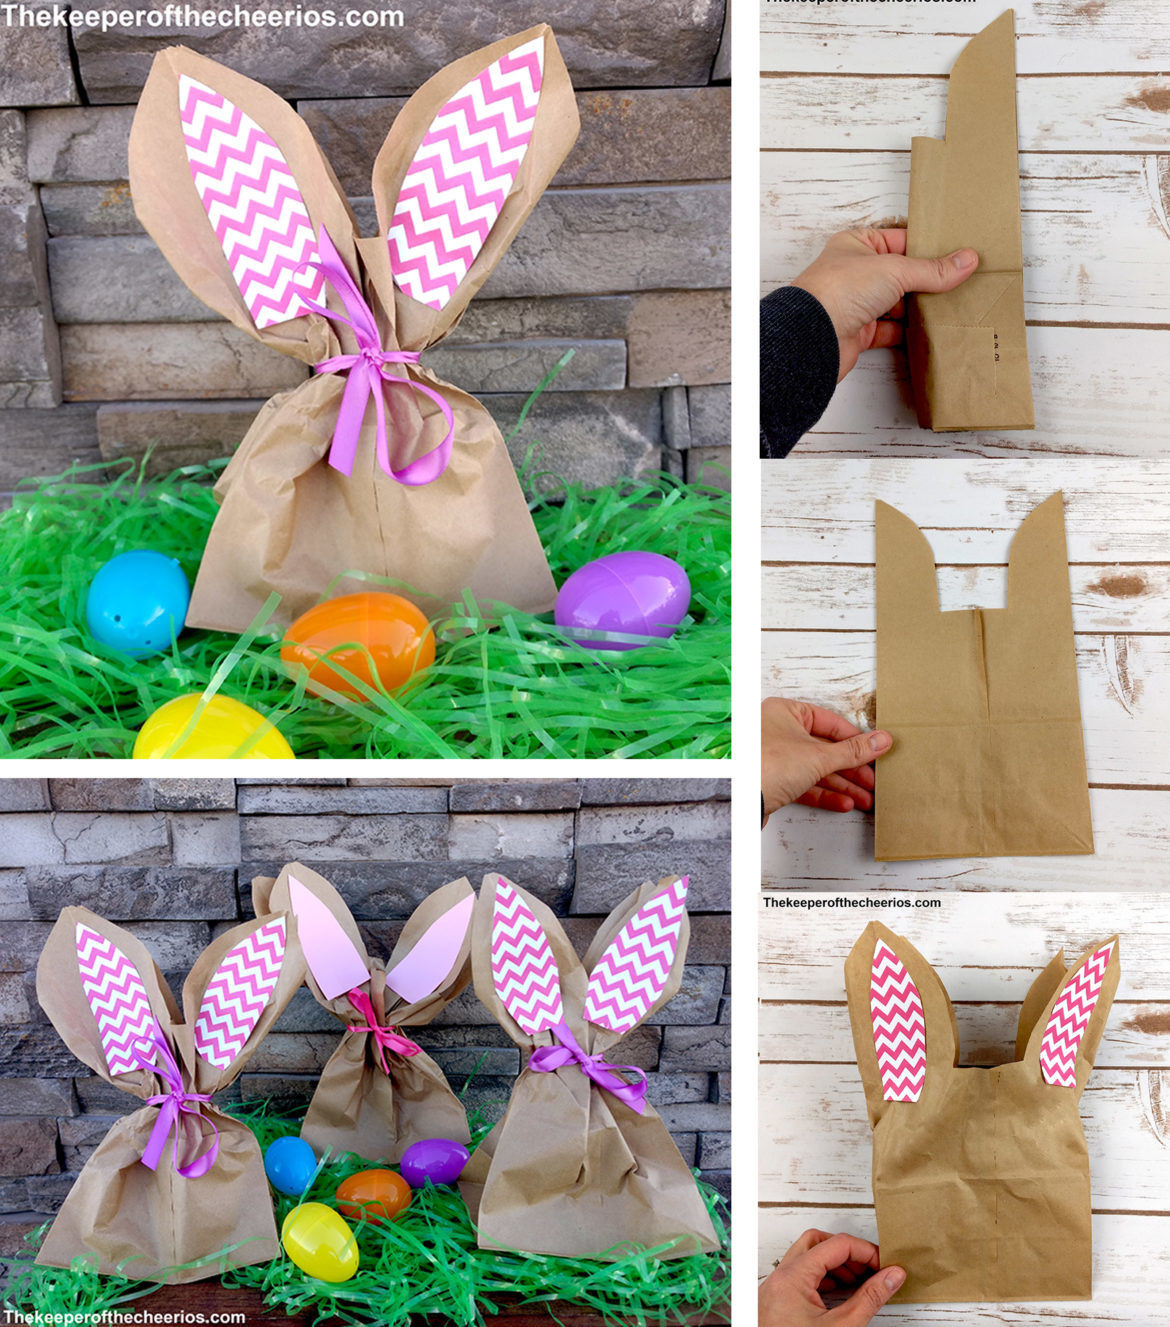 Easter Bag Ideas
 Easter Bunny Treat Bags The Keeper of the Cheerios